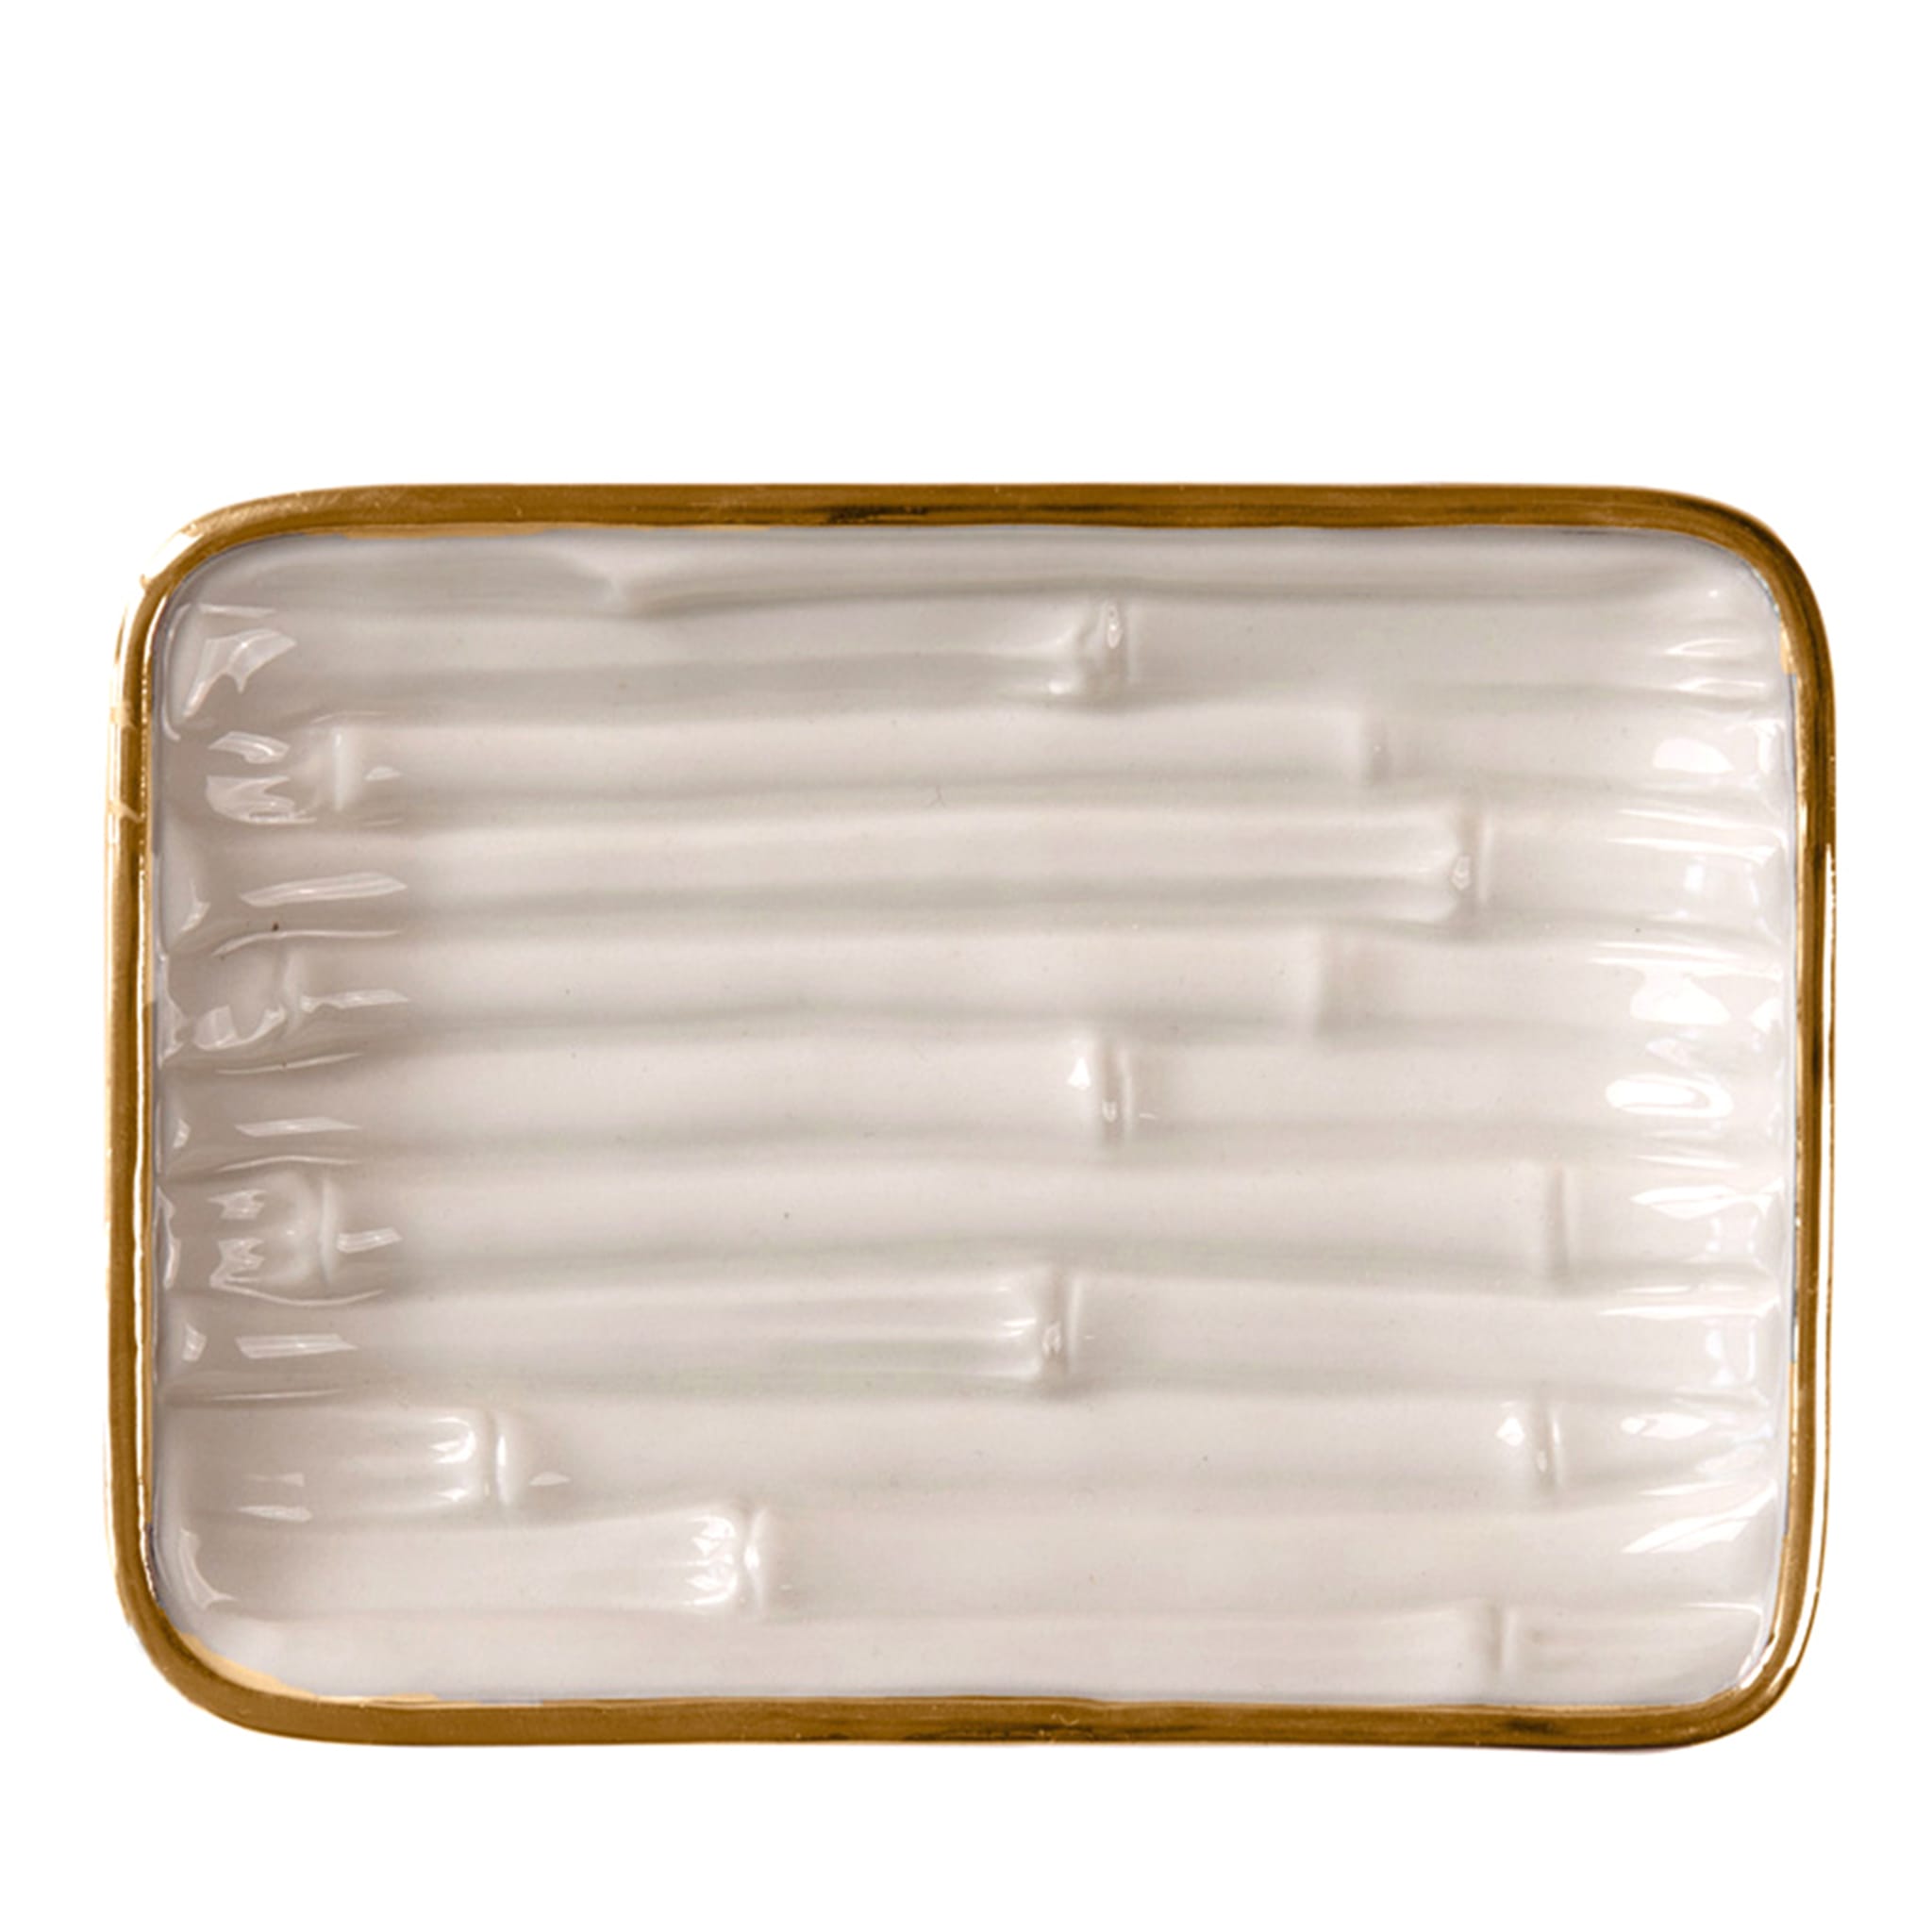 BAMBOO SOAP DISH - WHITE AND GOLD - Main view